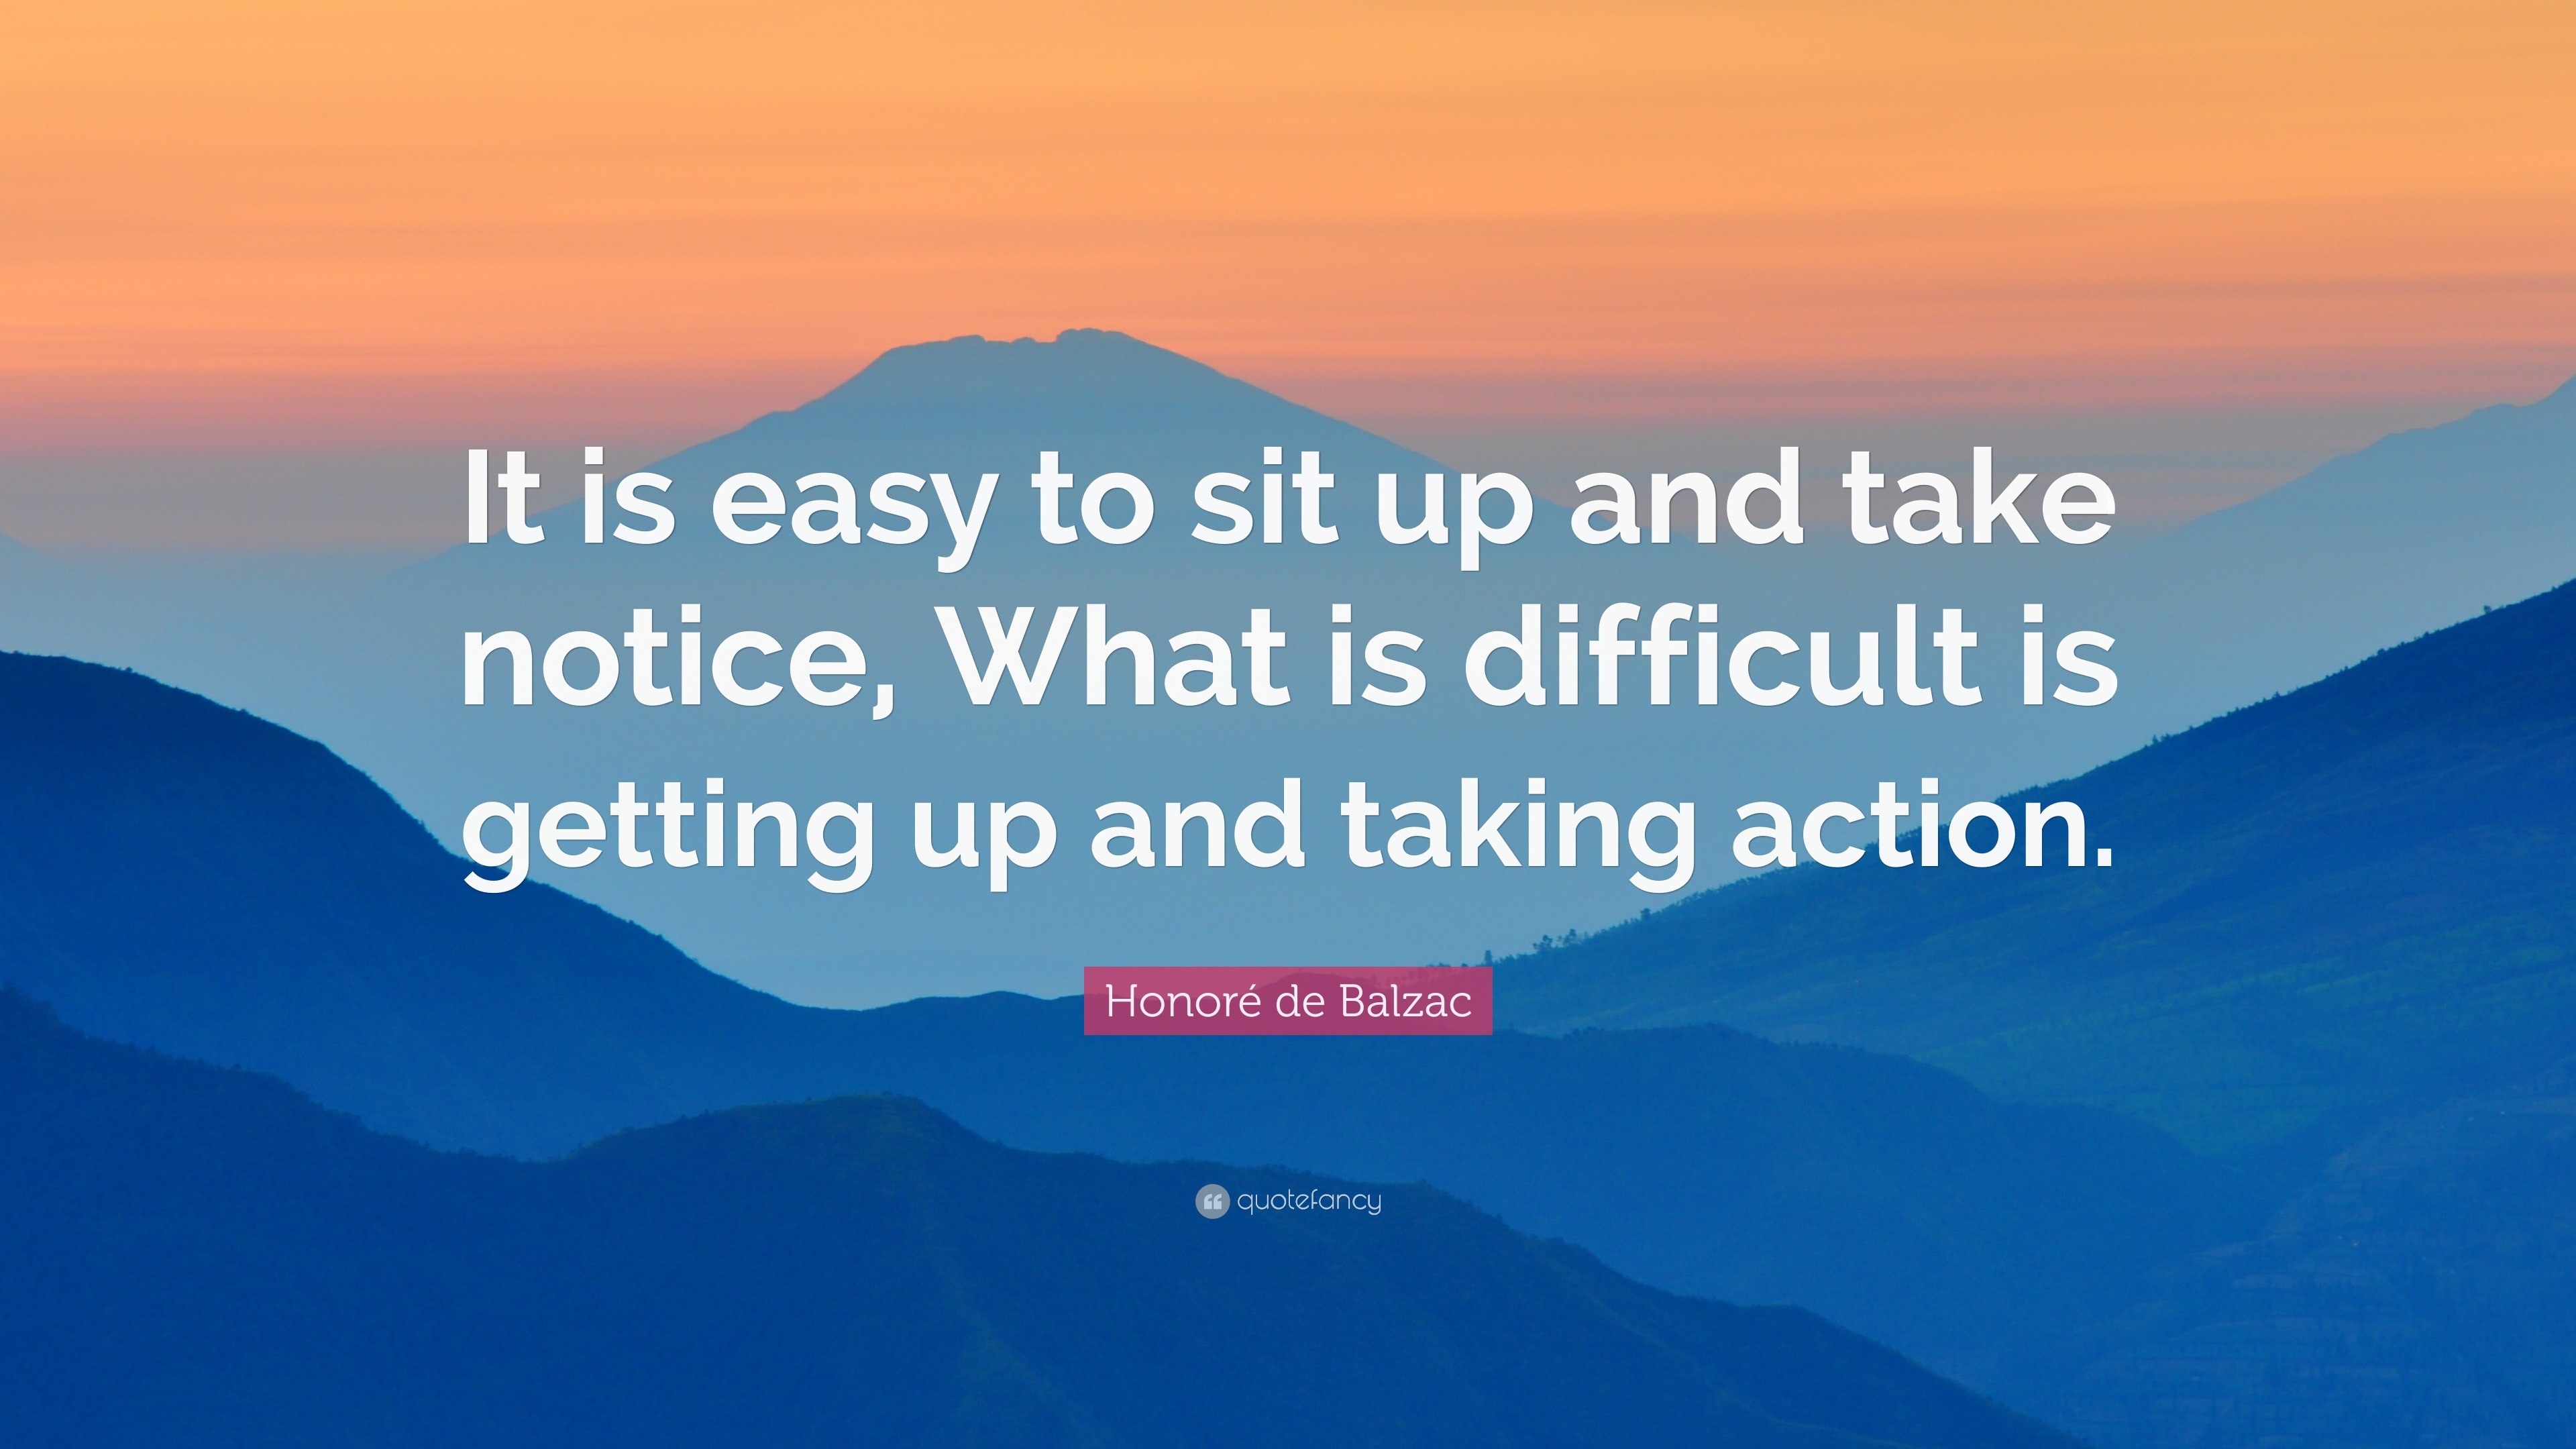 Honoré de Balzac Quote: “It is easy to sit up and take notice, What is difficult is ...3840 x 2160